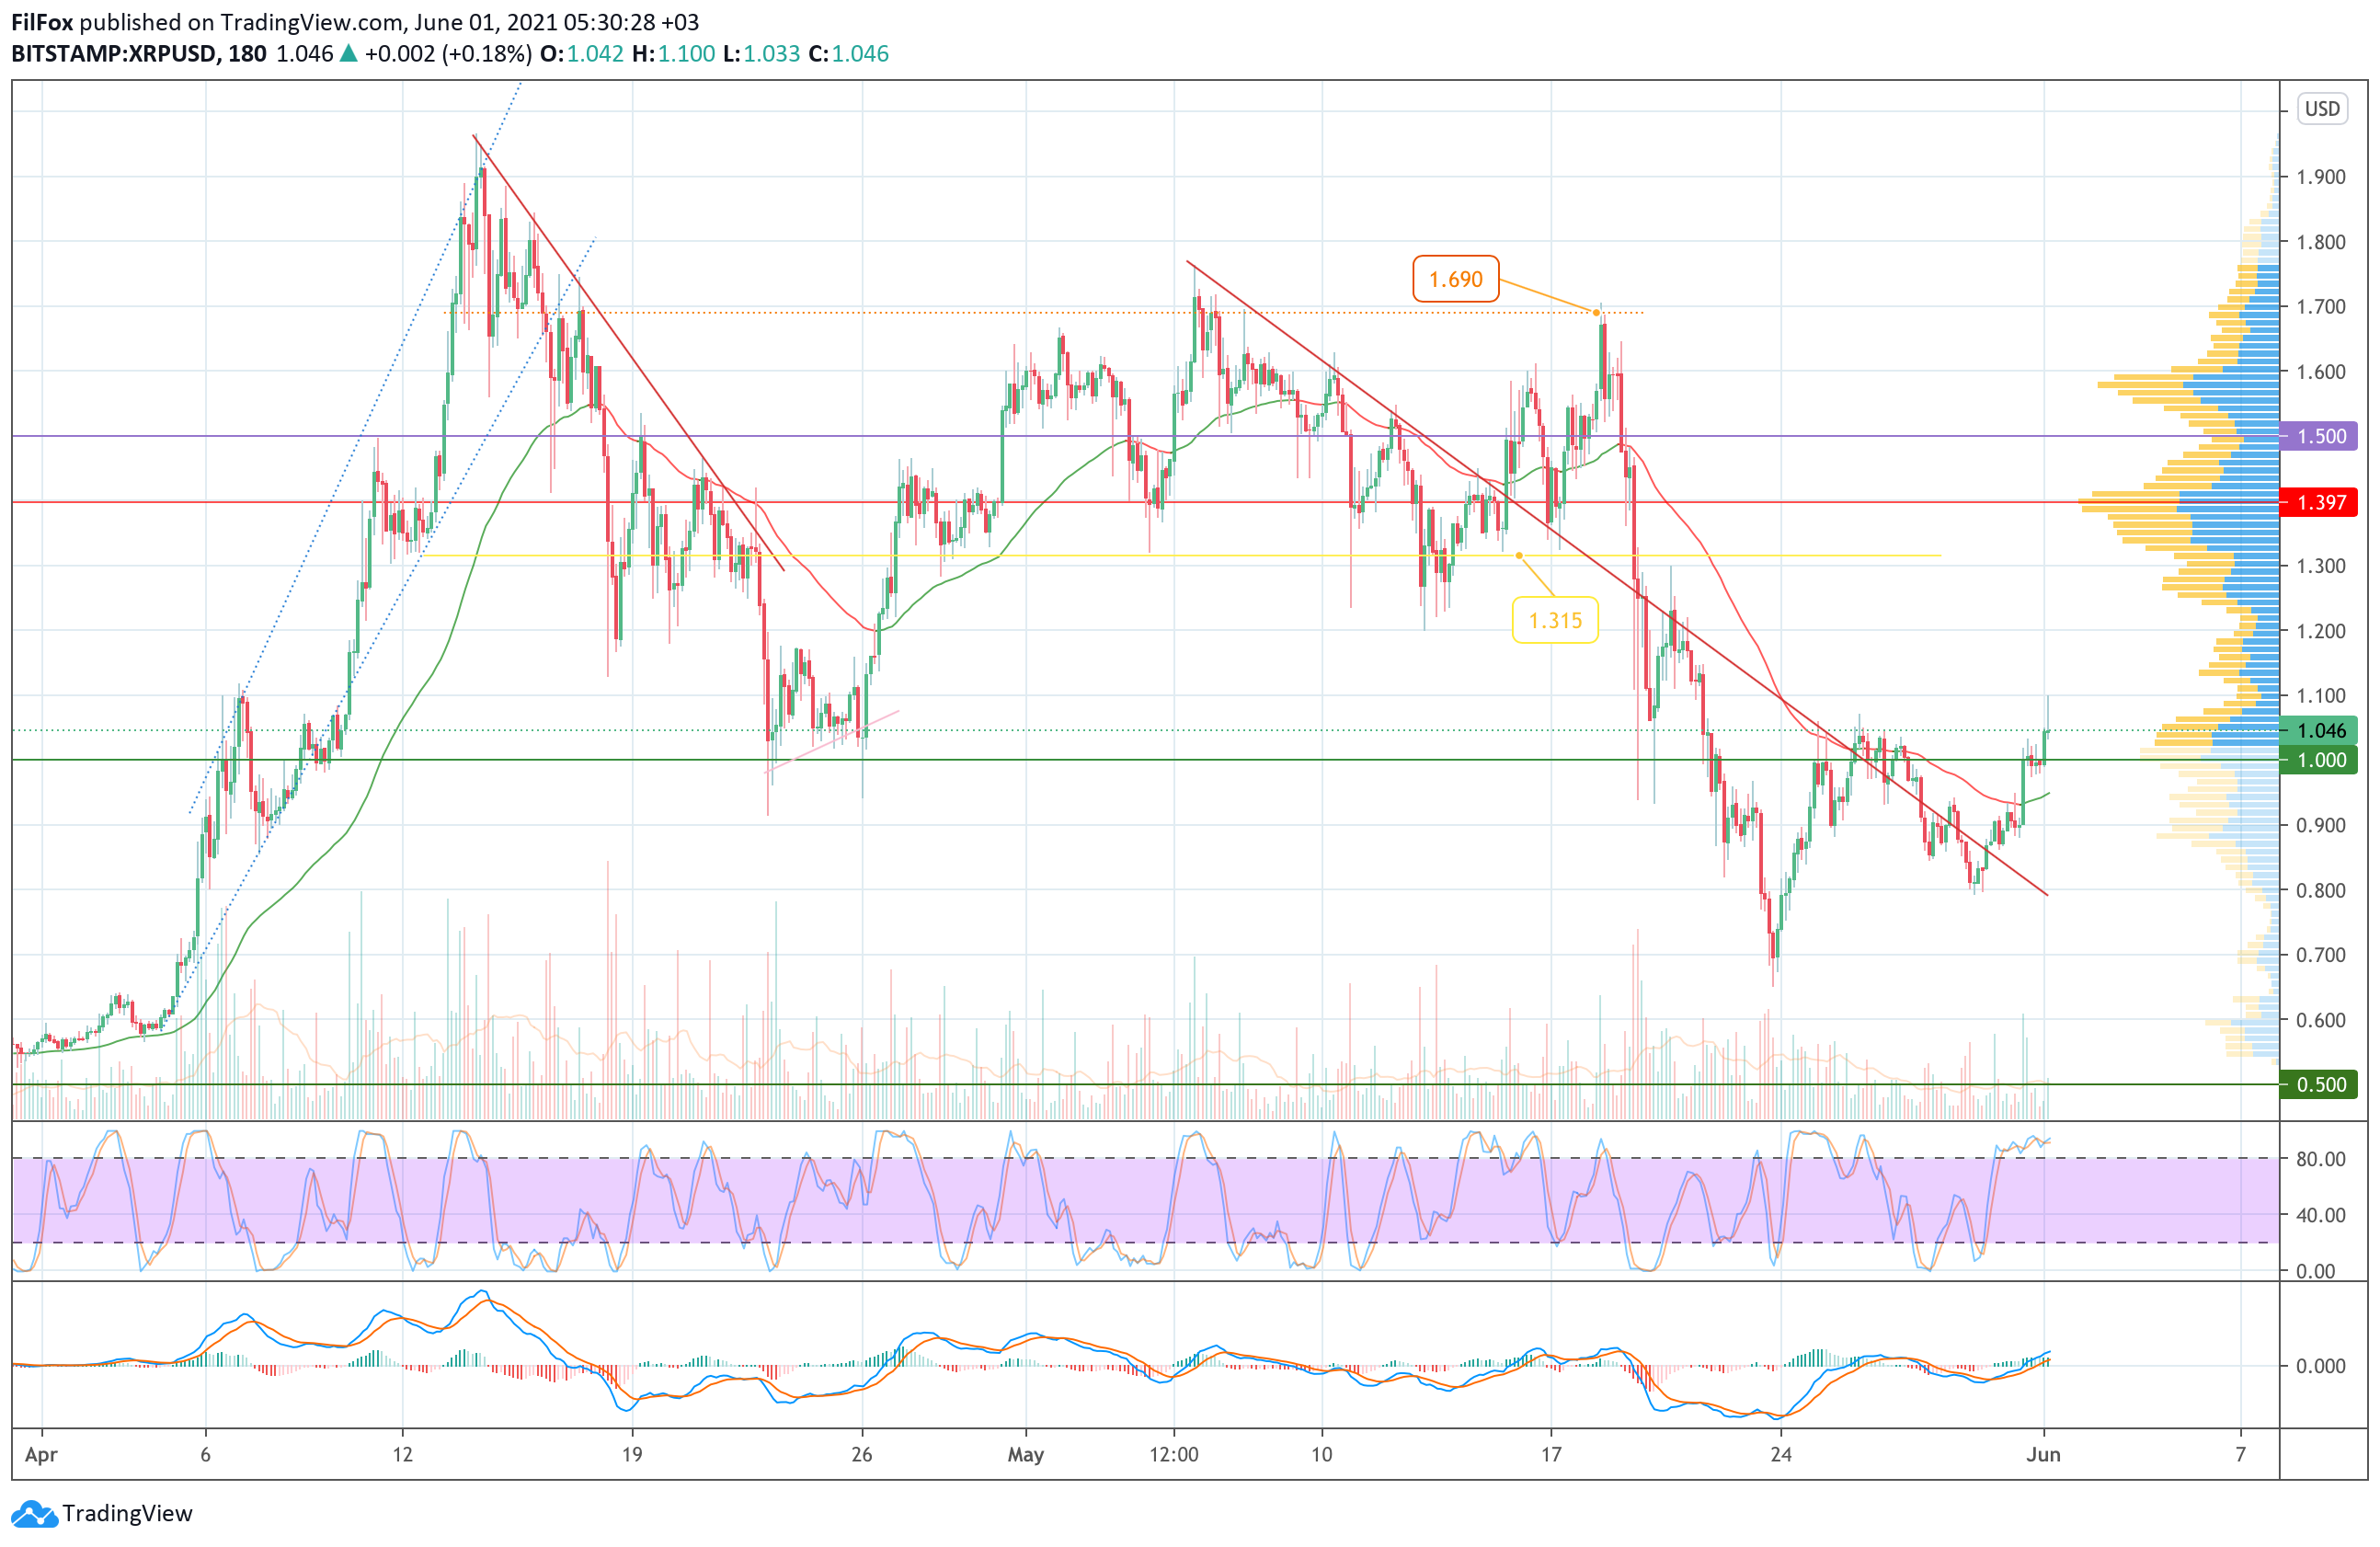 Analysis of the prices of Bitcoin, Ethereum, XRP for 06/01/2021